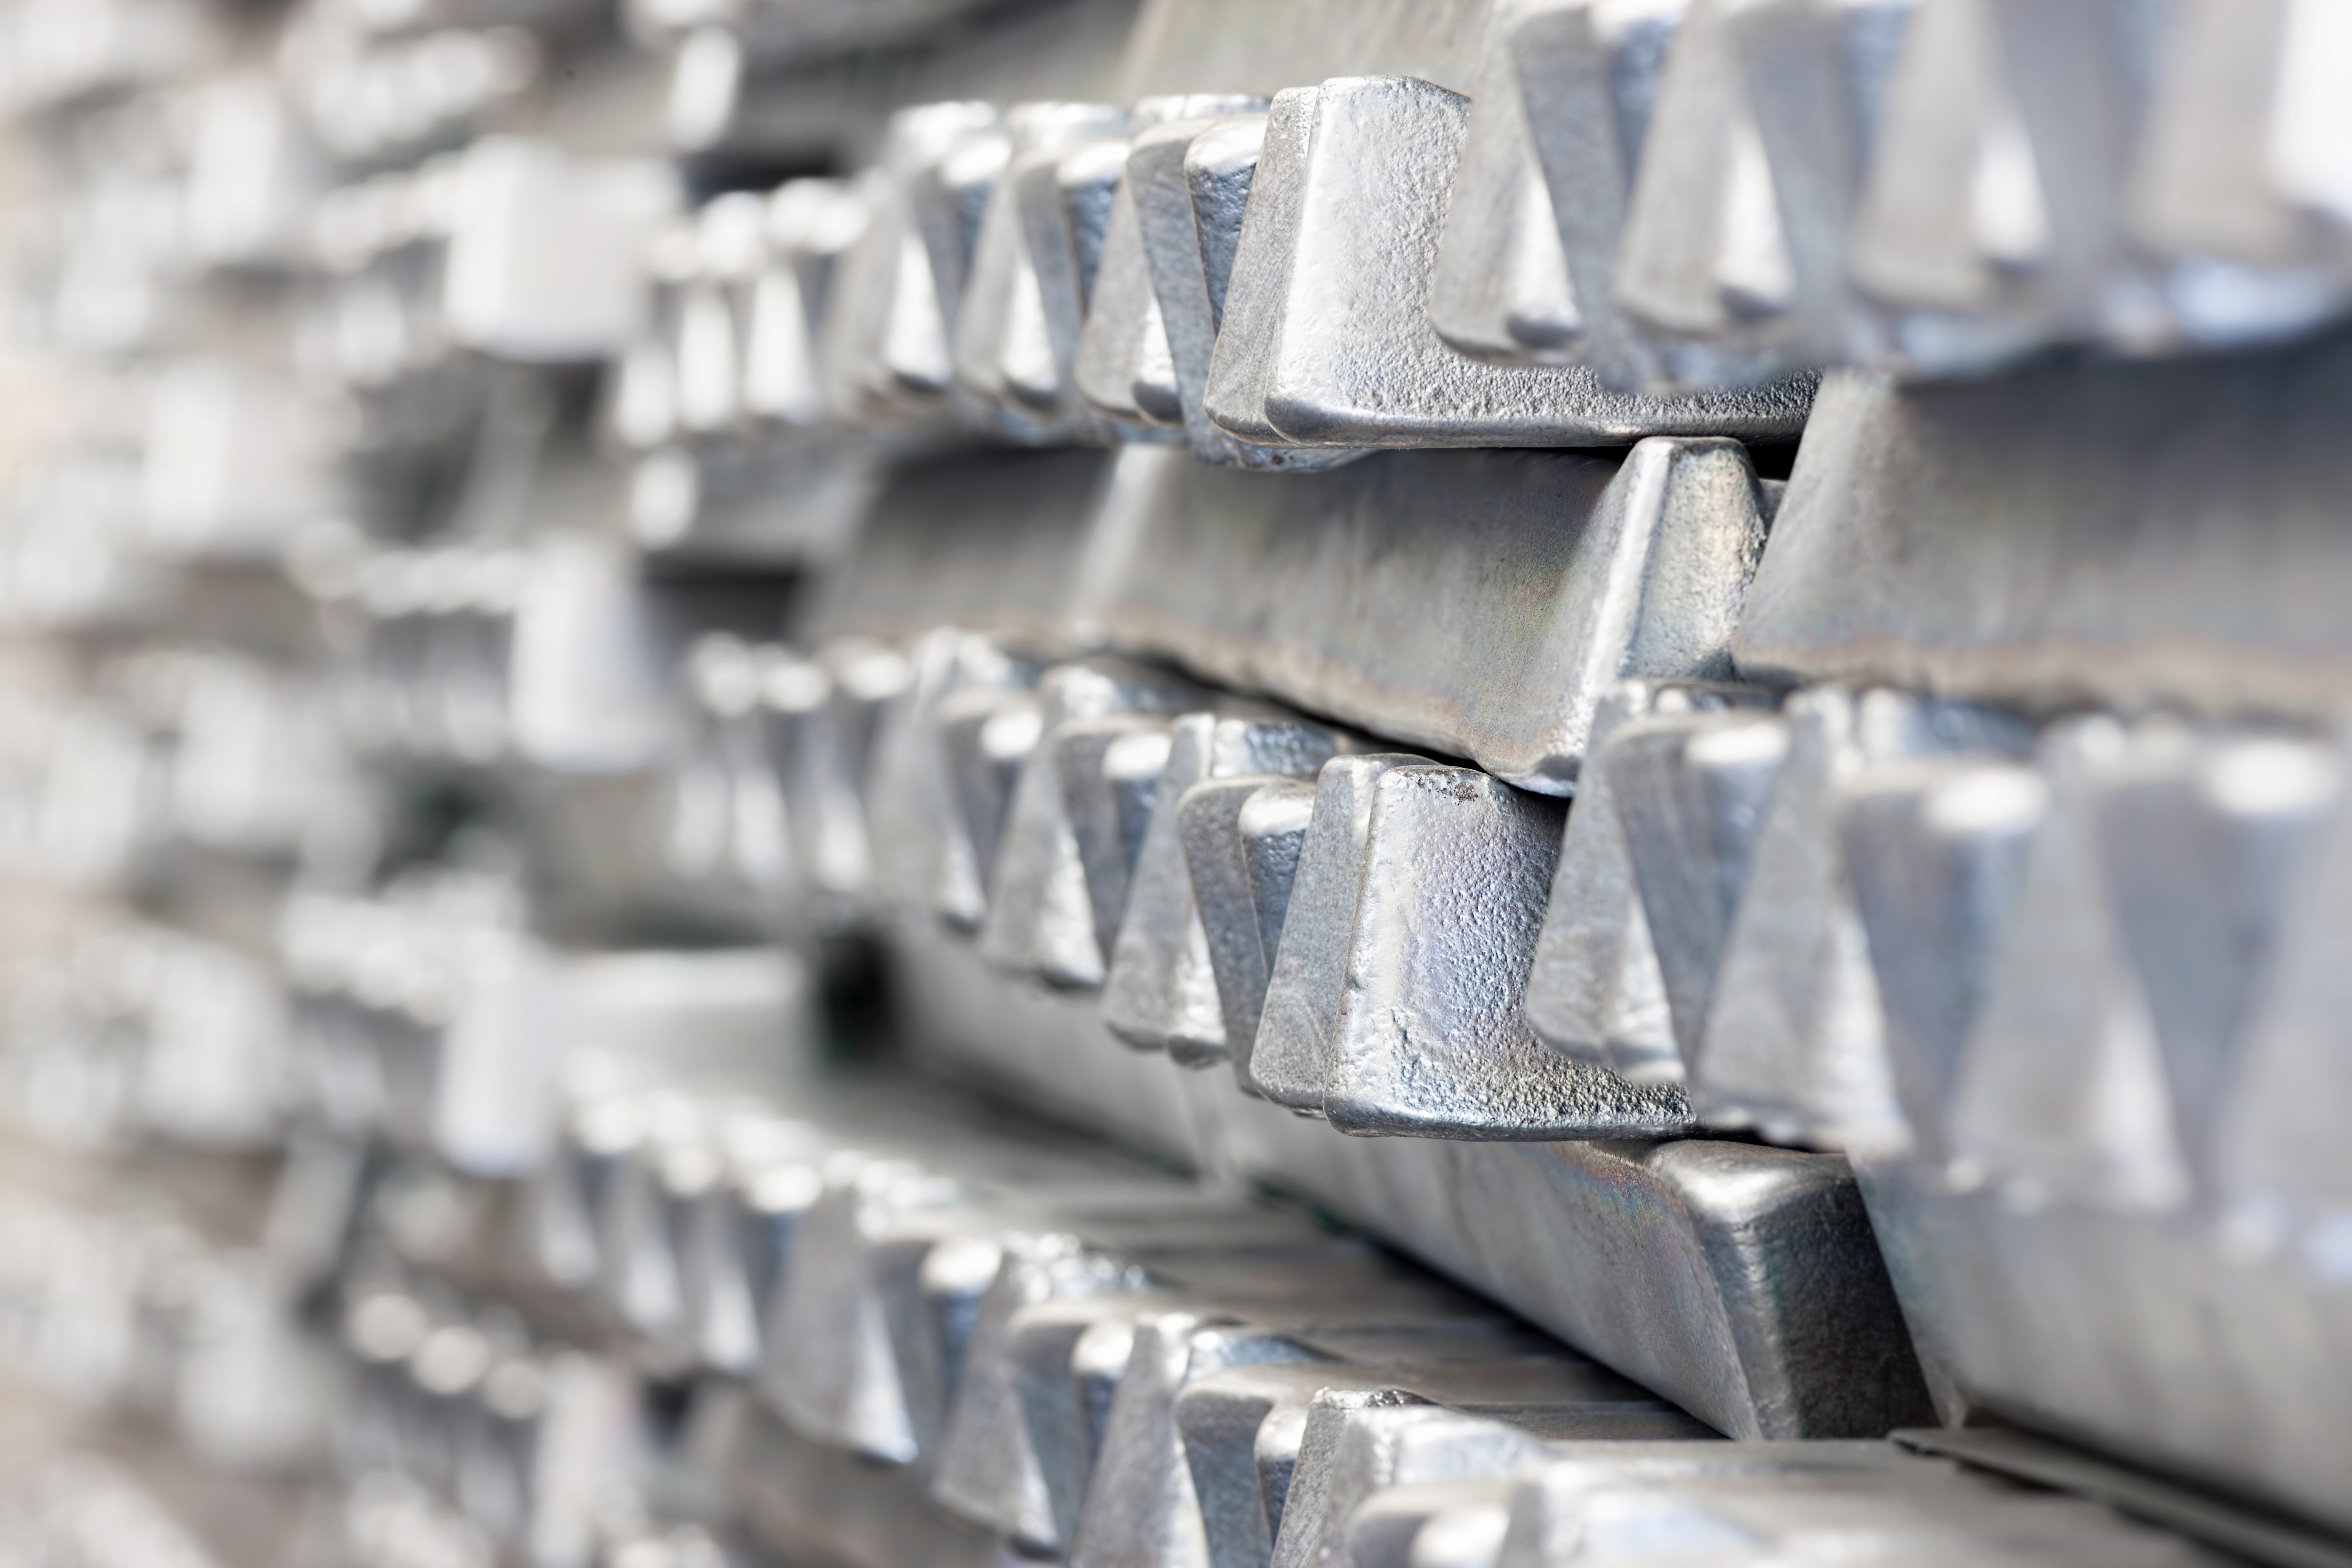 Aluminium market prices, insights, charts and events